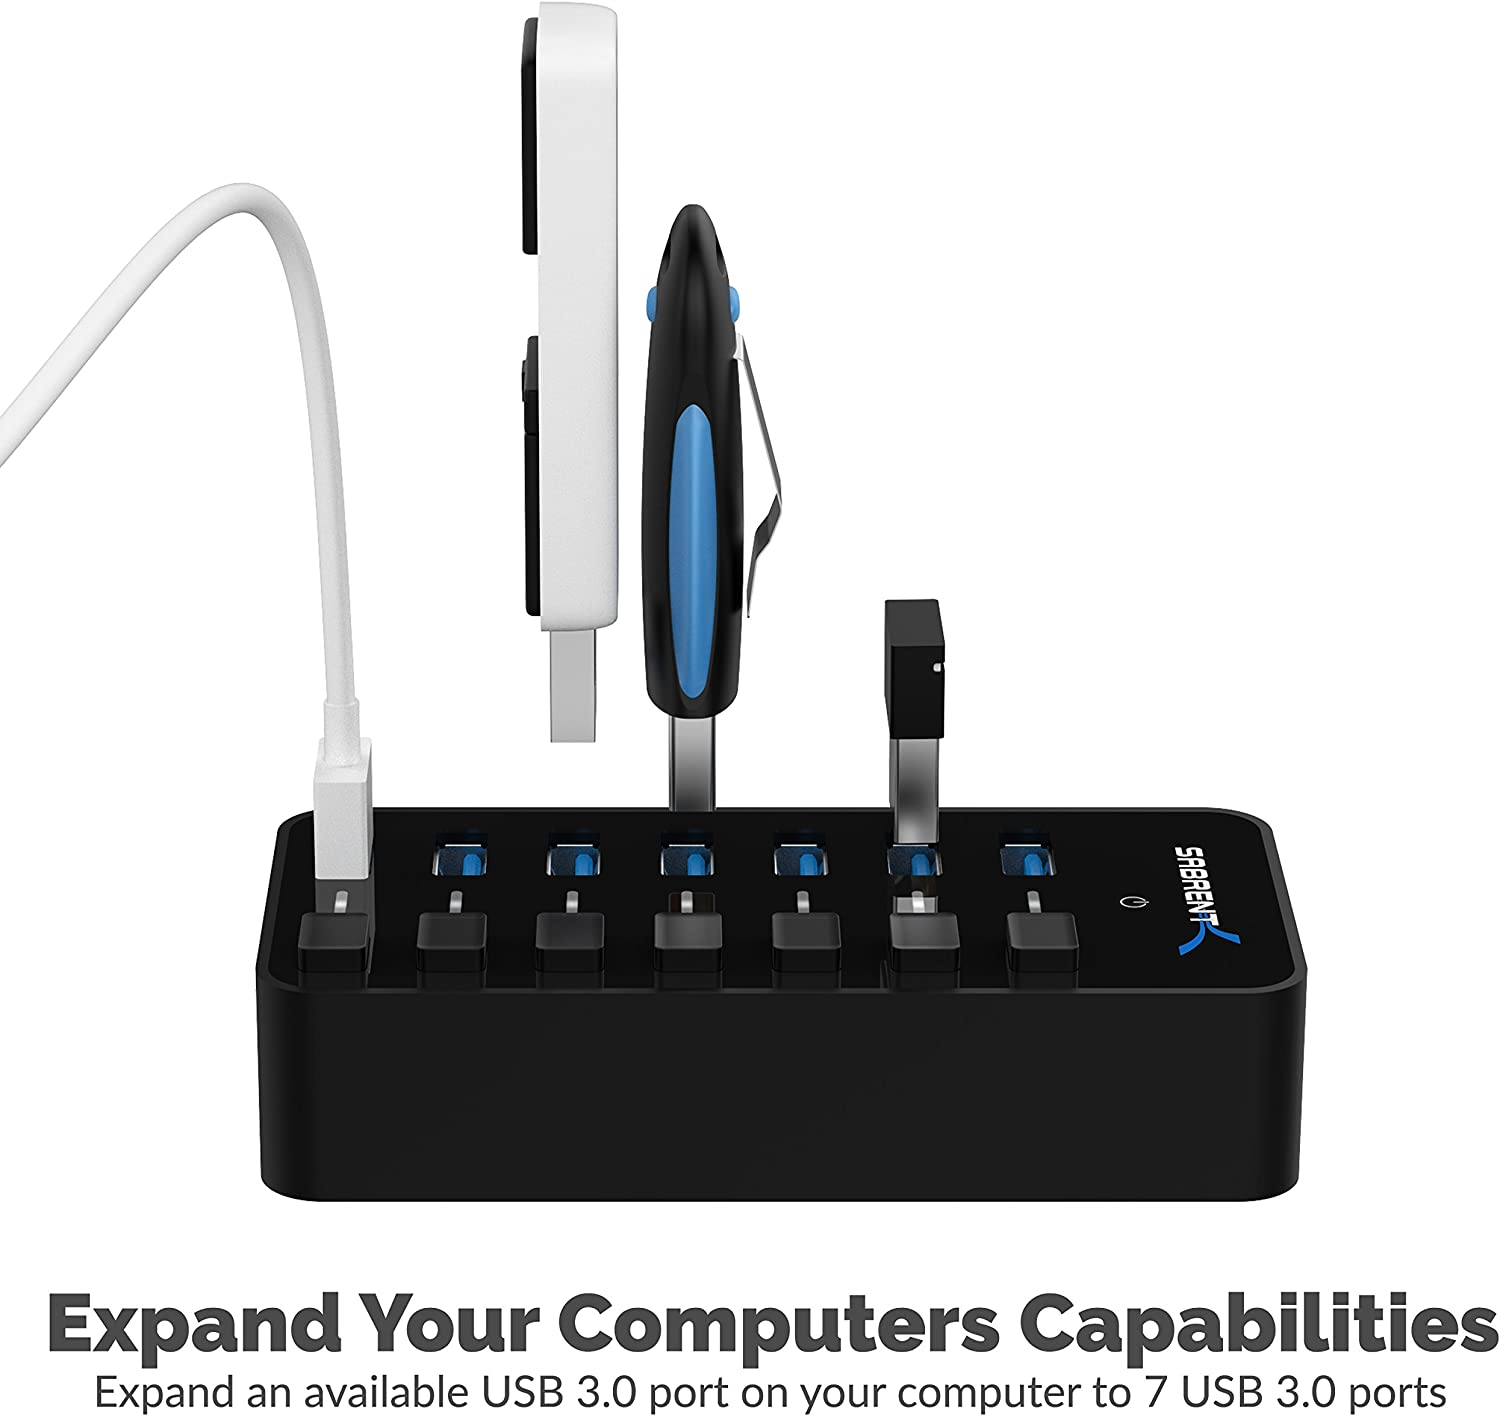 SABRENT 36W 7 Port USB 3.0 Hub with Individual Power Switches and LEDs Includes 36W 12V/3A Power Adapter (HB-BUP7)